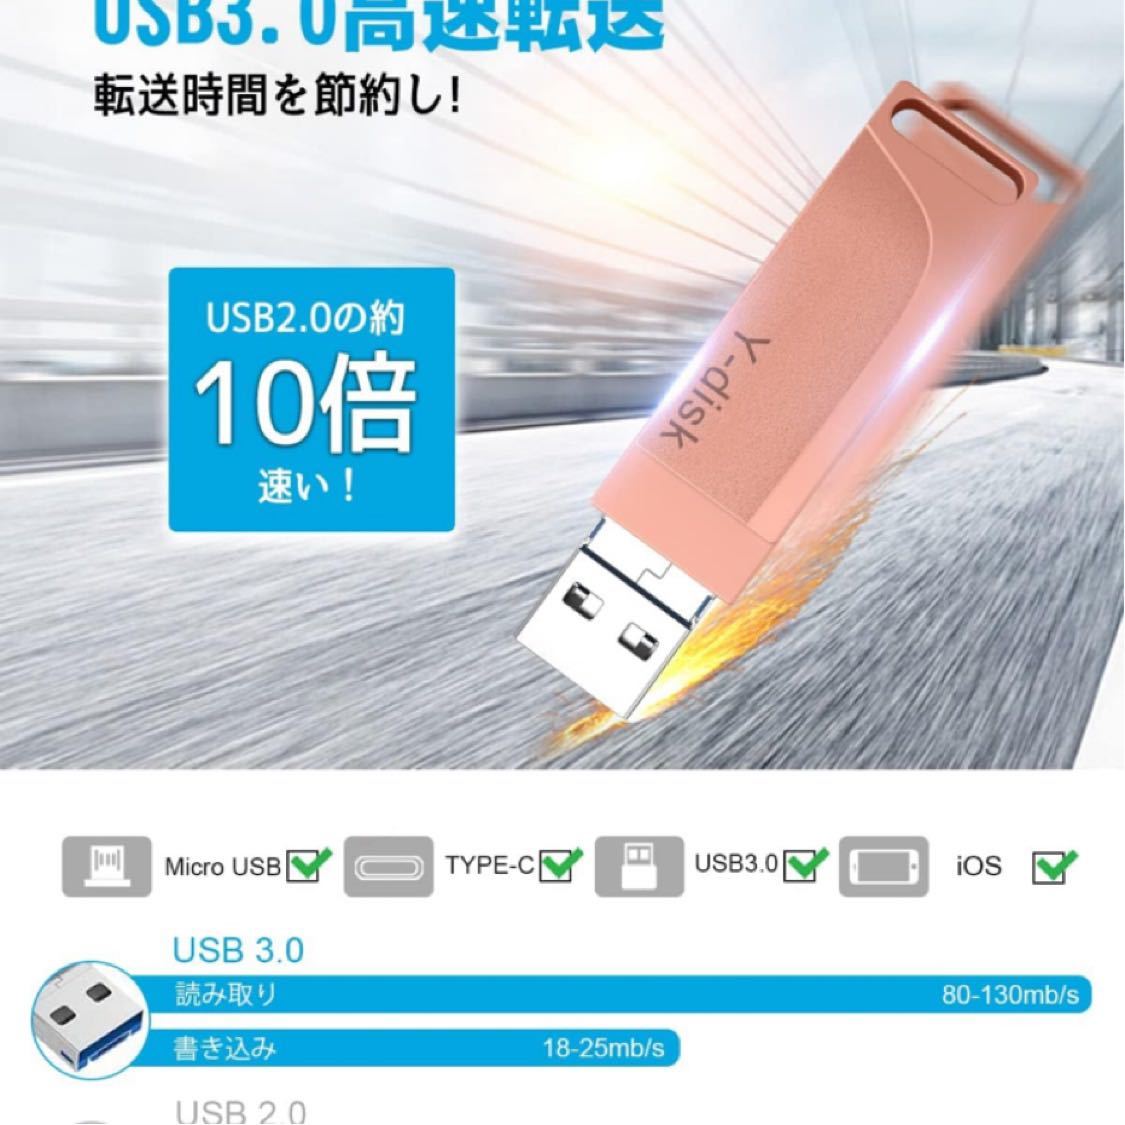 USB memory 128GB[ industry new development conversion for adaptor un- necessary ]4in1 flash Drive high capacity high speed USB 3.0 pink )